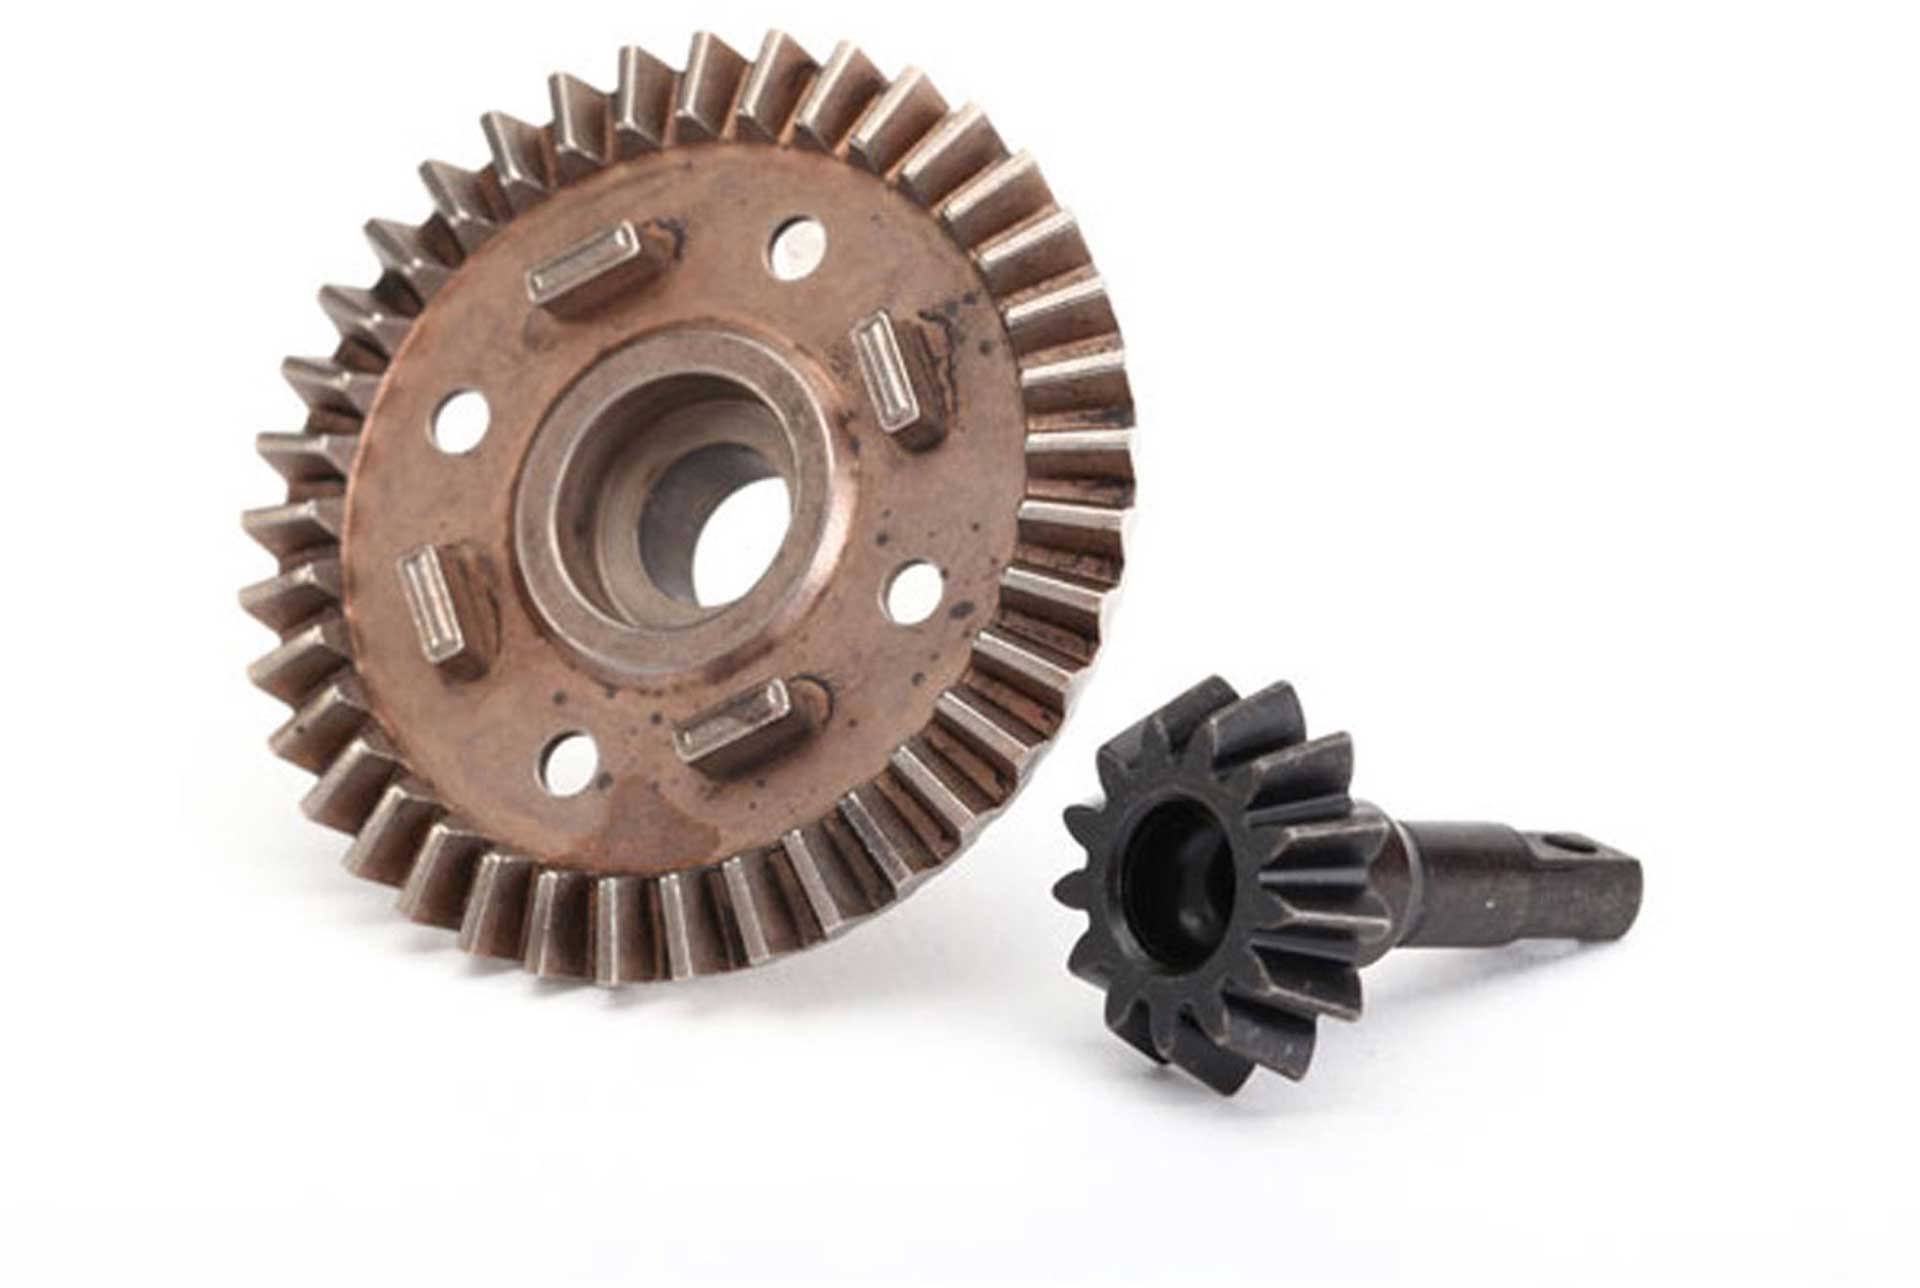 Traxxas Tra8679 Differential Ring and Pinion Gear - 1:8 Scale